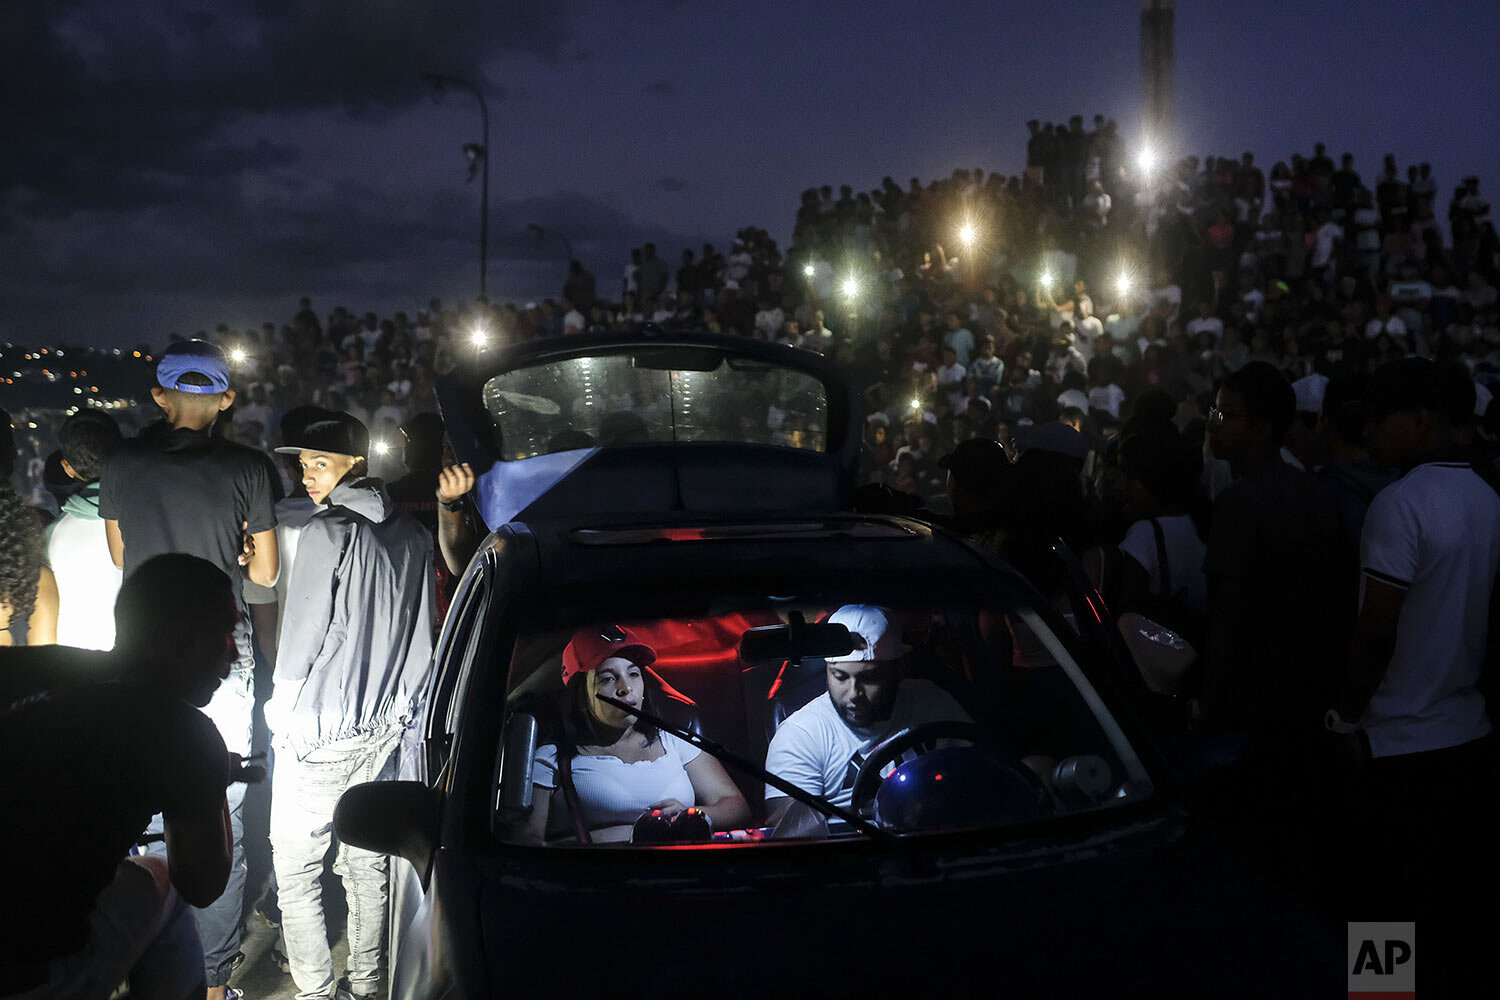  A couple turns on music in their car during a motorcycle stunt exhibition in the Petare neighborhood of Caracas, Venezuela, Sept. 26, 2021. (AP Photo/Matias Delacroix) 